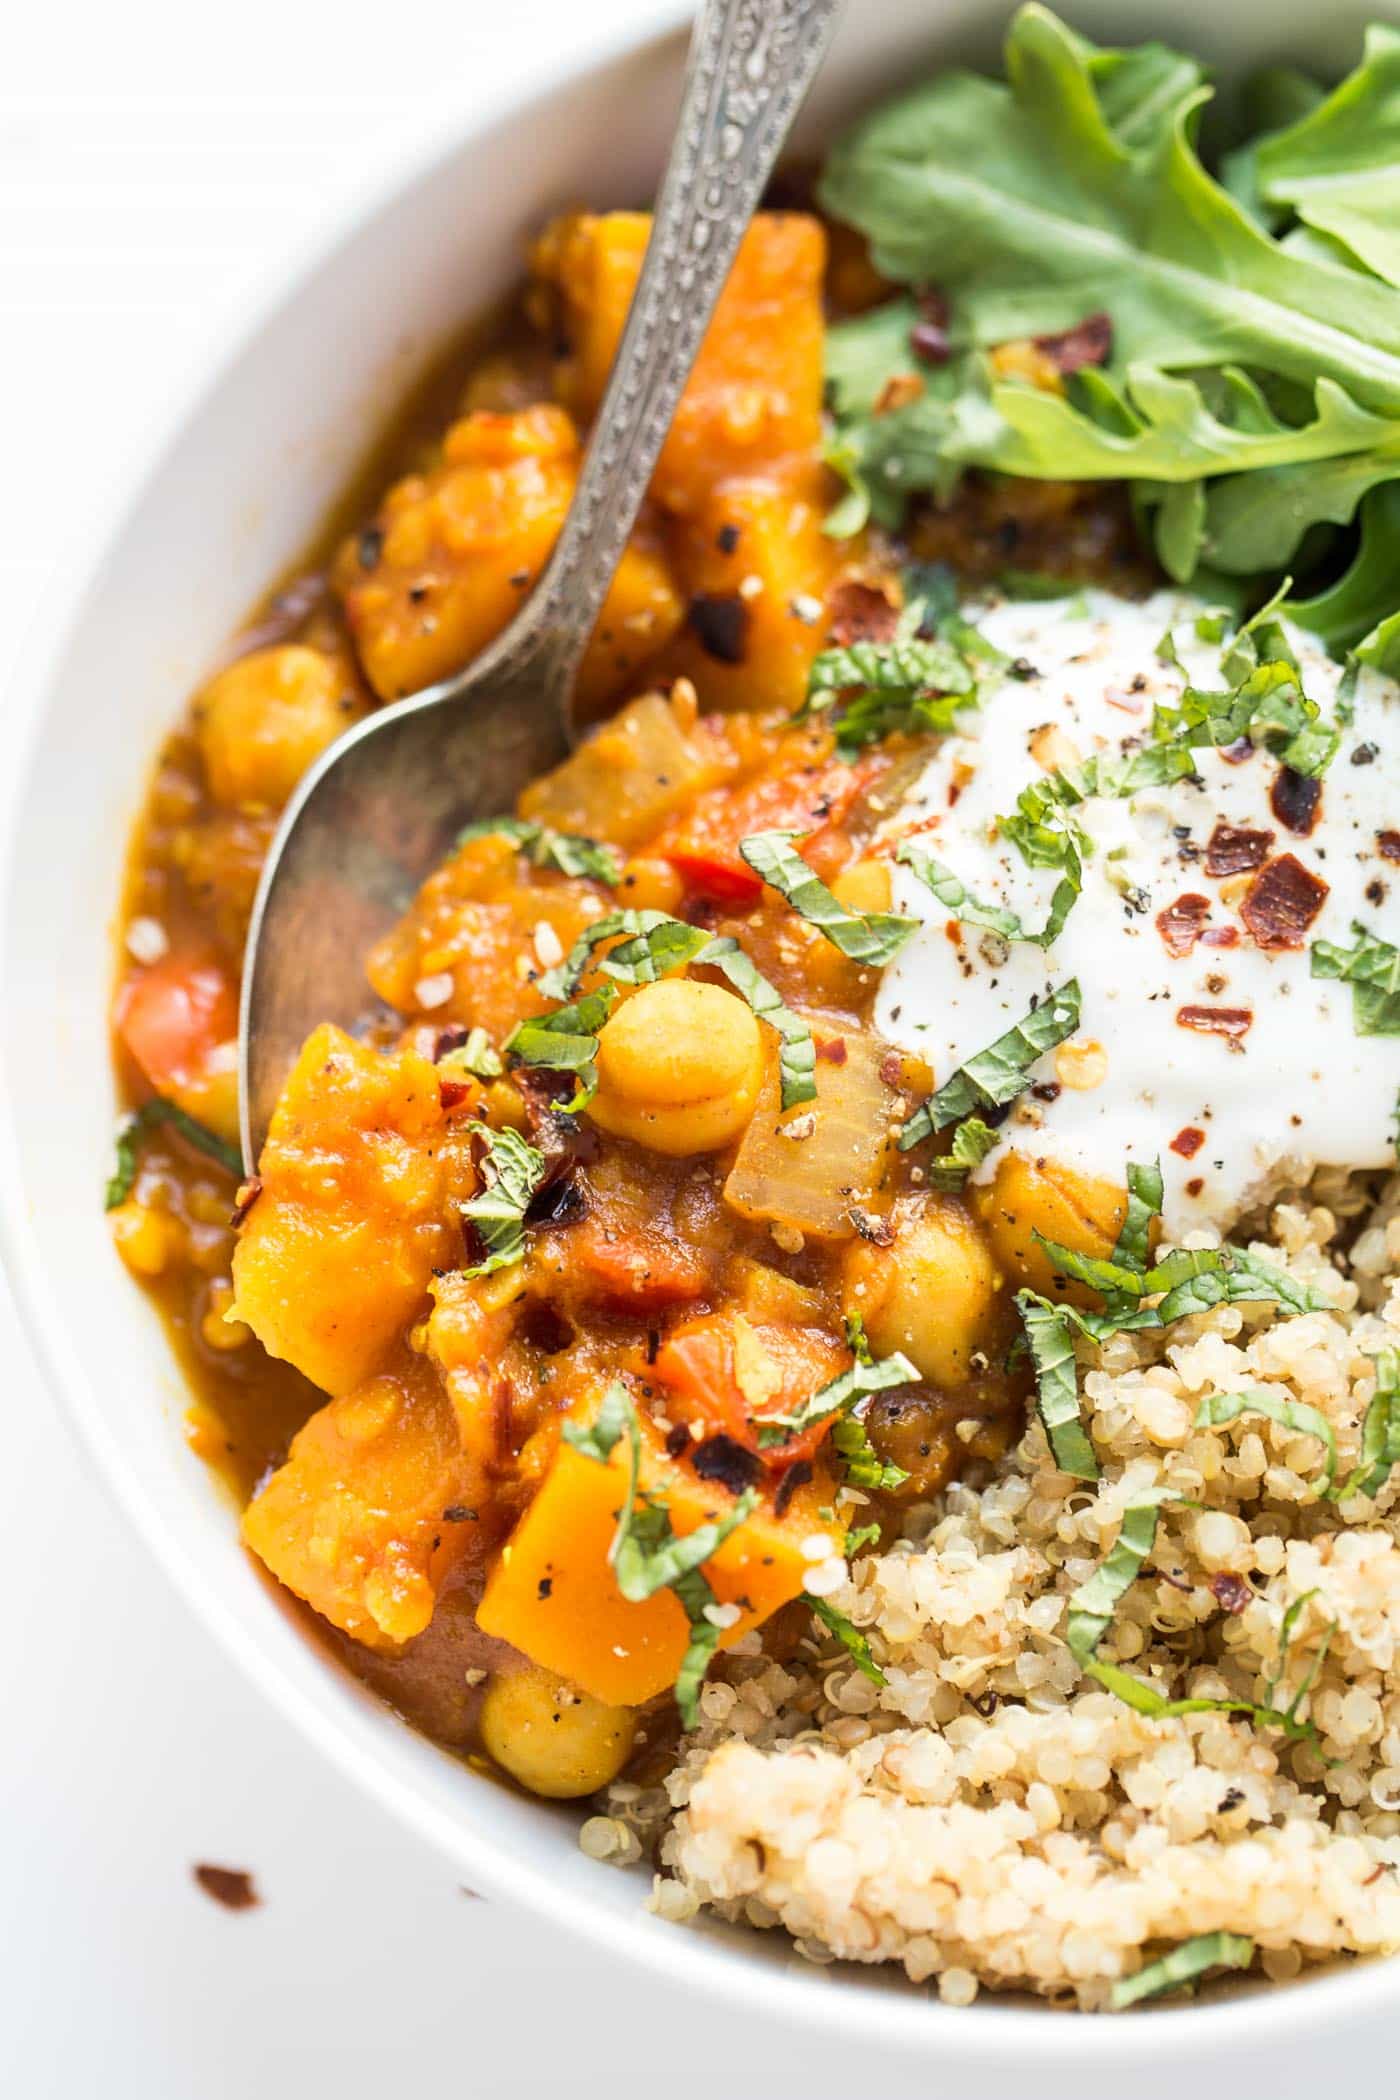 Slow Cooker Moroccan Chickpea Stew from simplyquinoa.com on foodiecrush.com